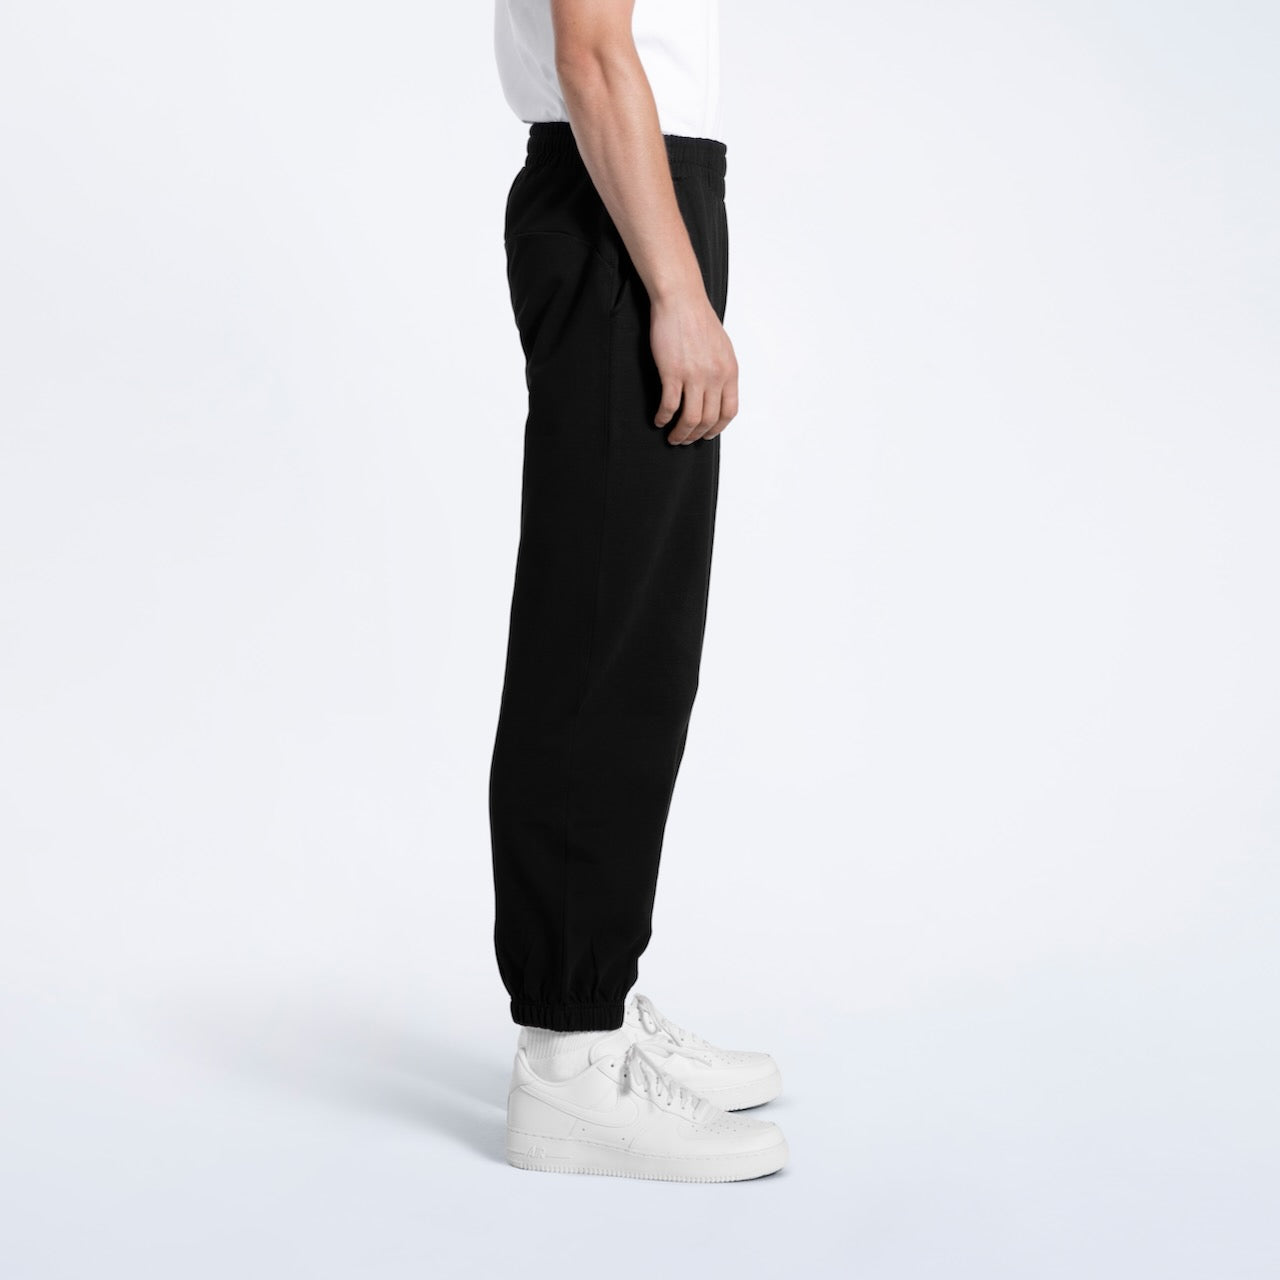 Men_French_Terry_Organic_Cotton_Sweatpants_Black_3_a7473903-9884-4aaa-a793-8ca946a62625.jpg